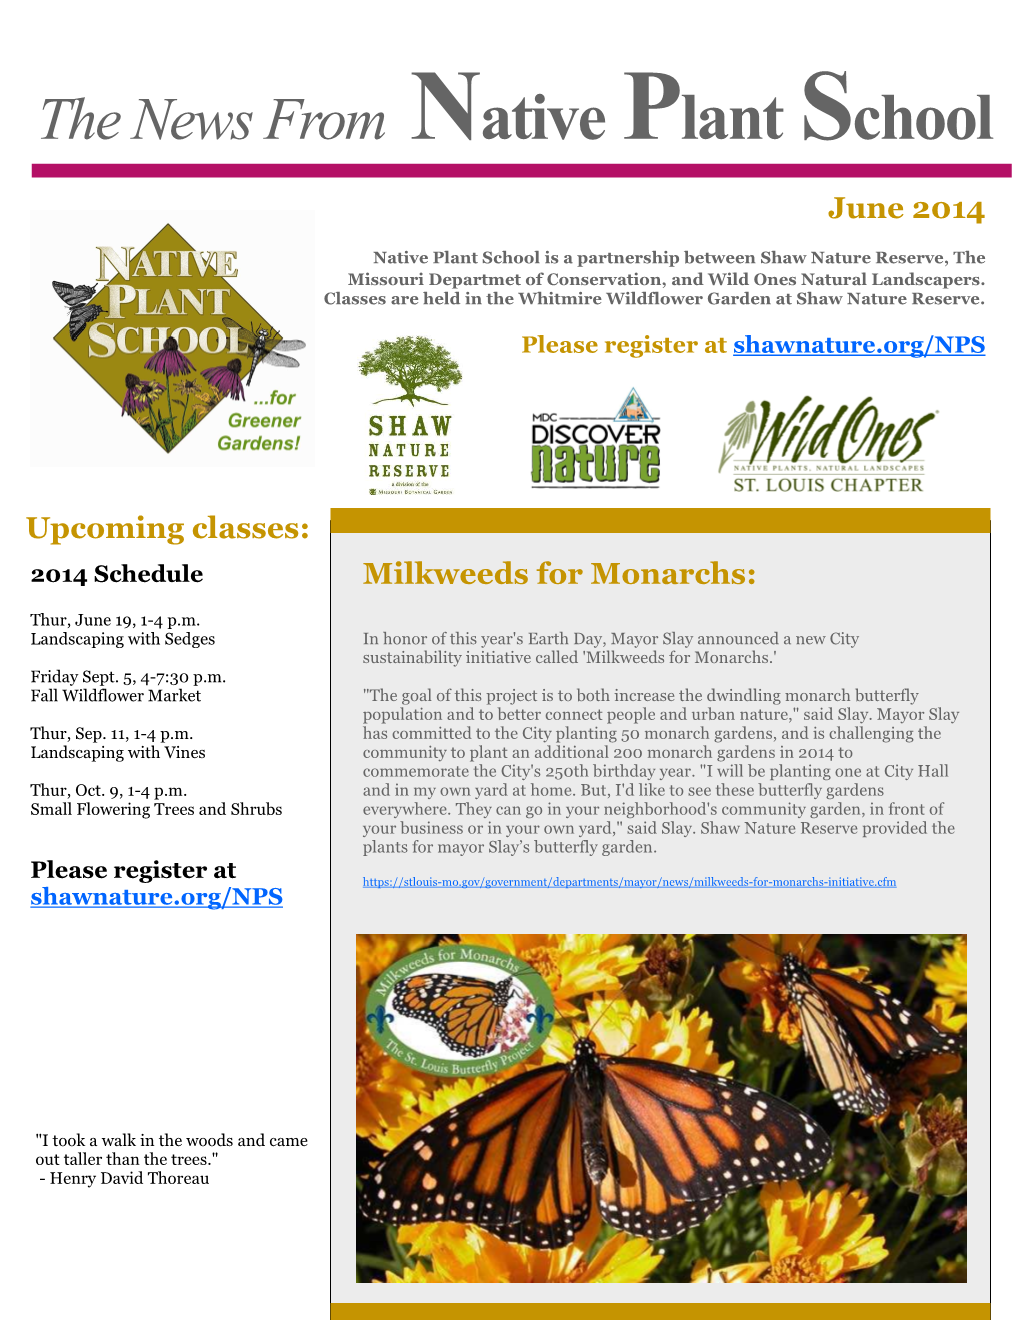 The News from Native Plant School